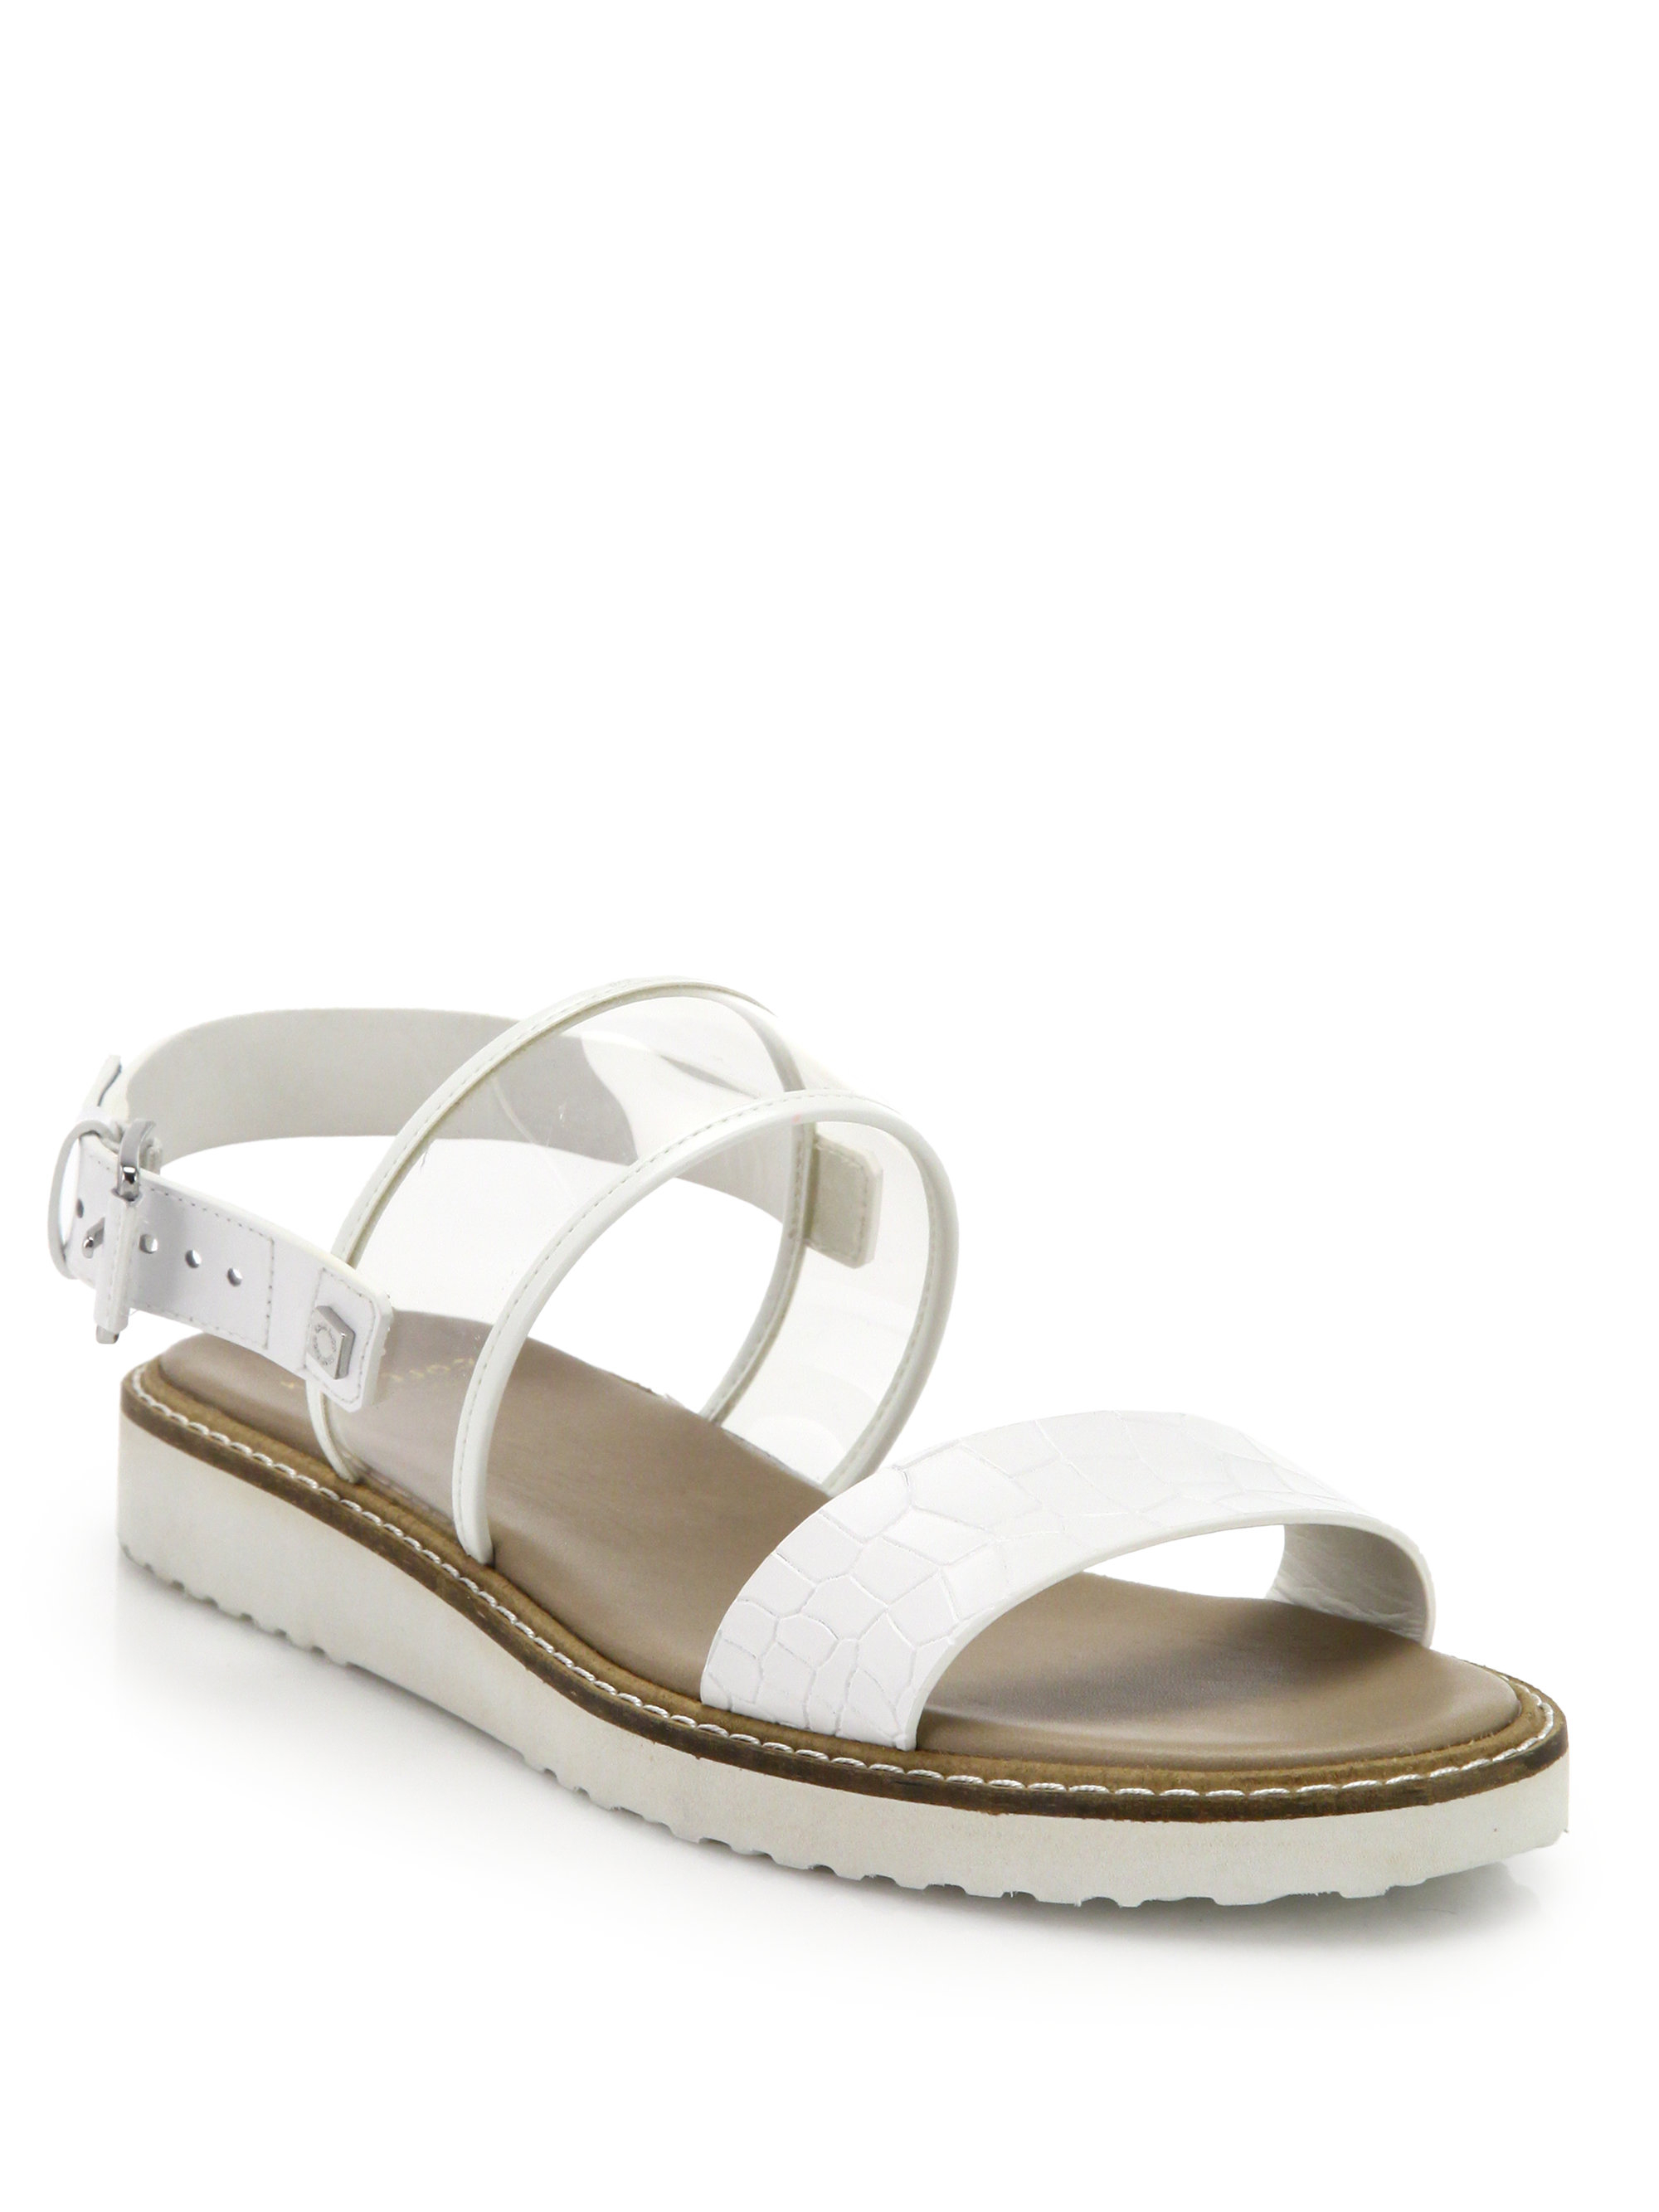 Lyst - Cole Haan Capri Croc-embossed Leather & Clear Plastic Sandals in ...